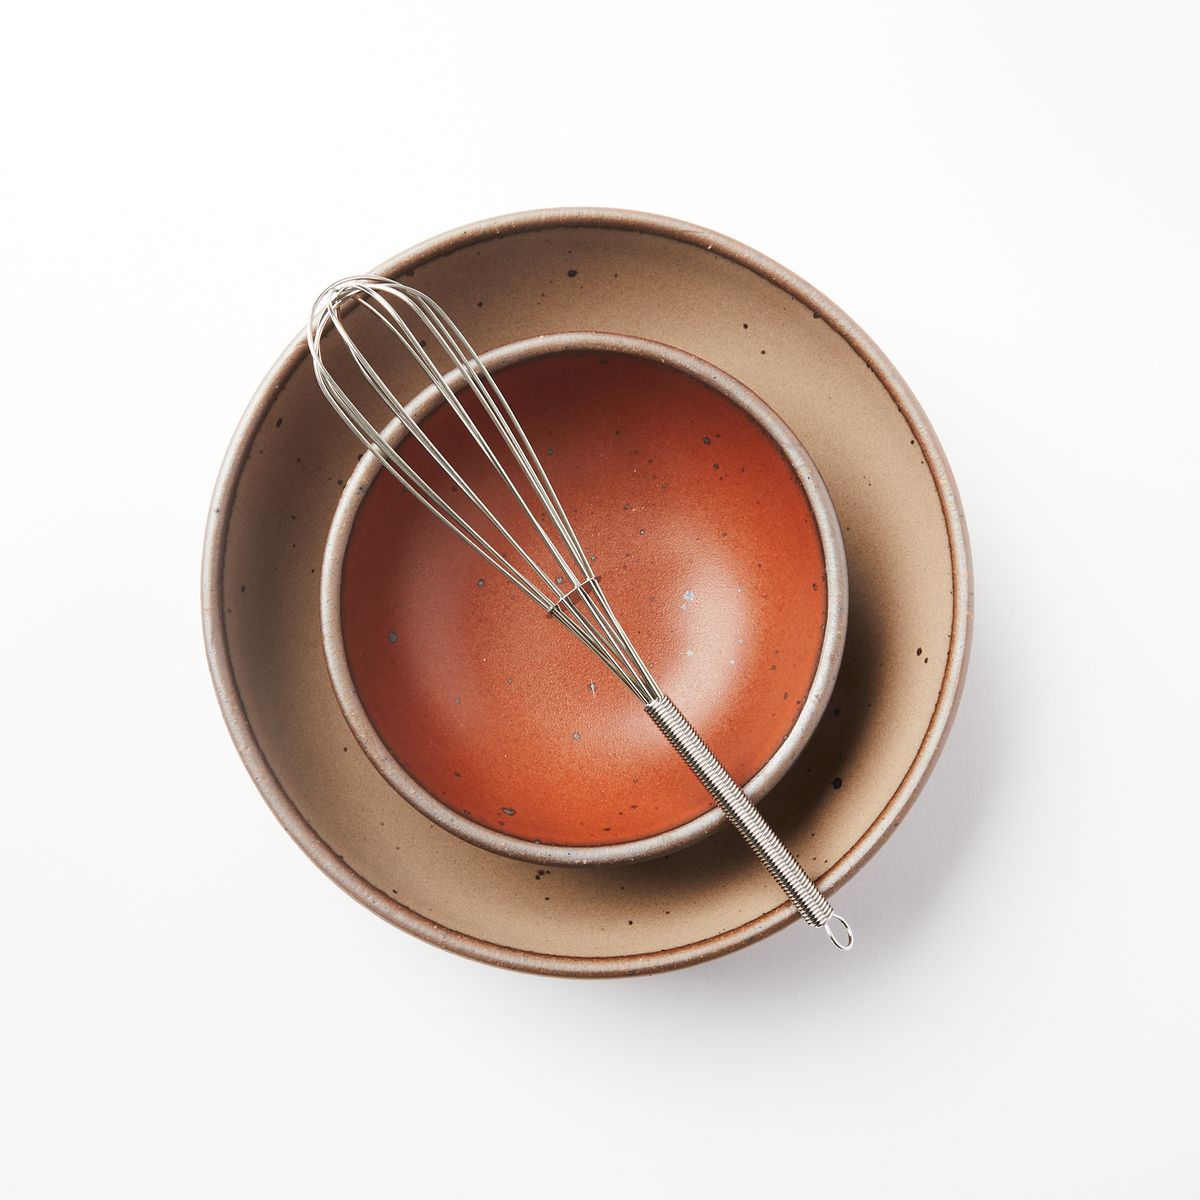 A tiny slim stainless steel whisk lays on top of 2 stacked bowls in terracotta and warm light brown